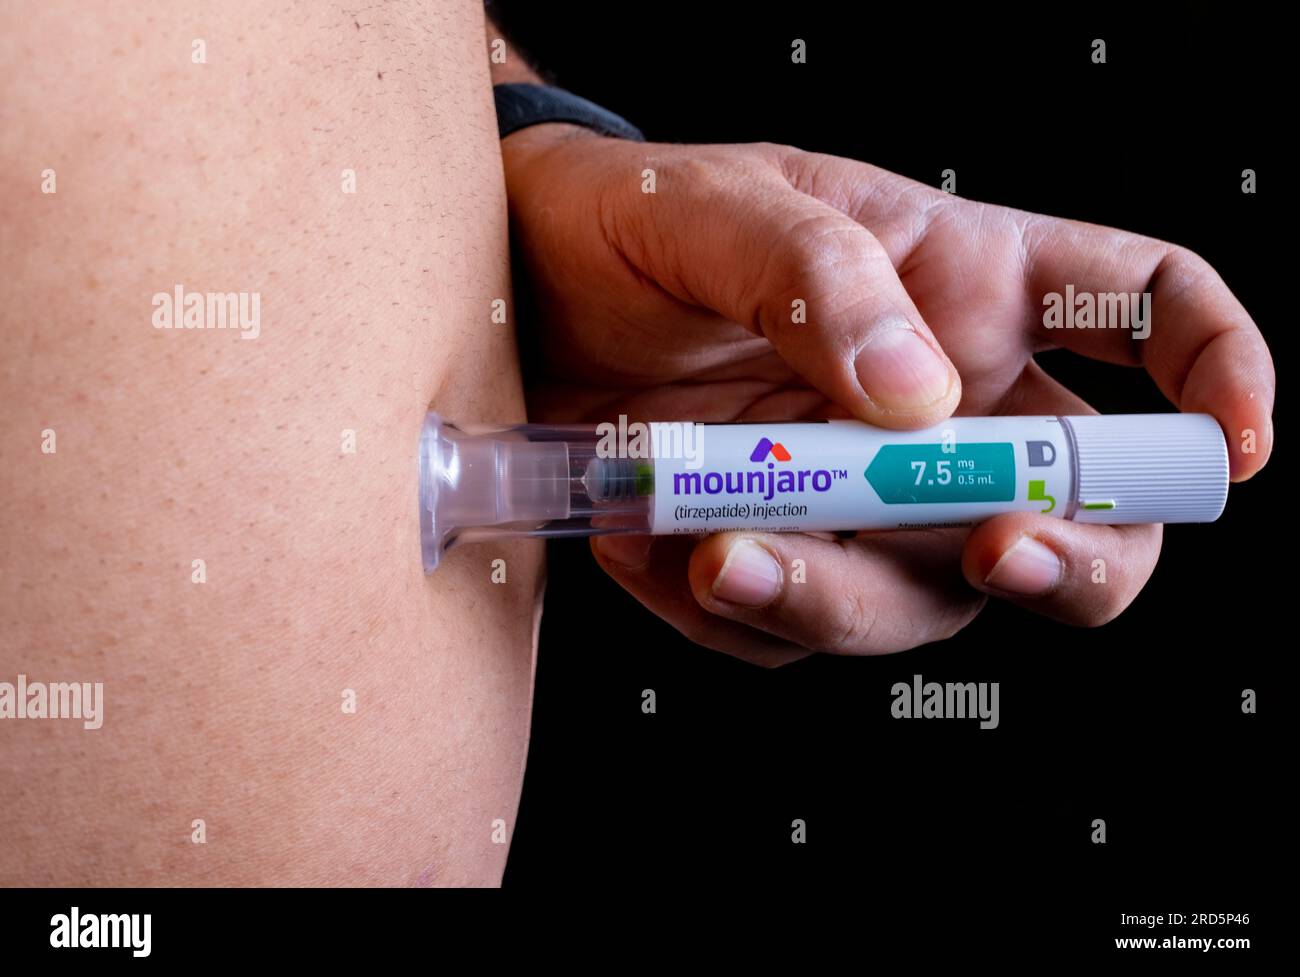 Ozempic injection hi-res stock photography and images - Alamy